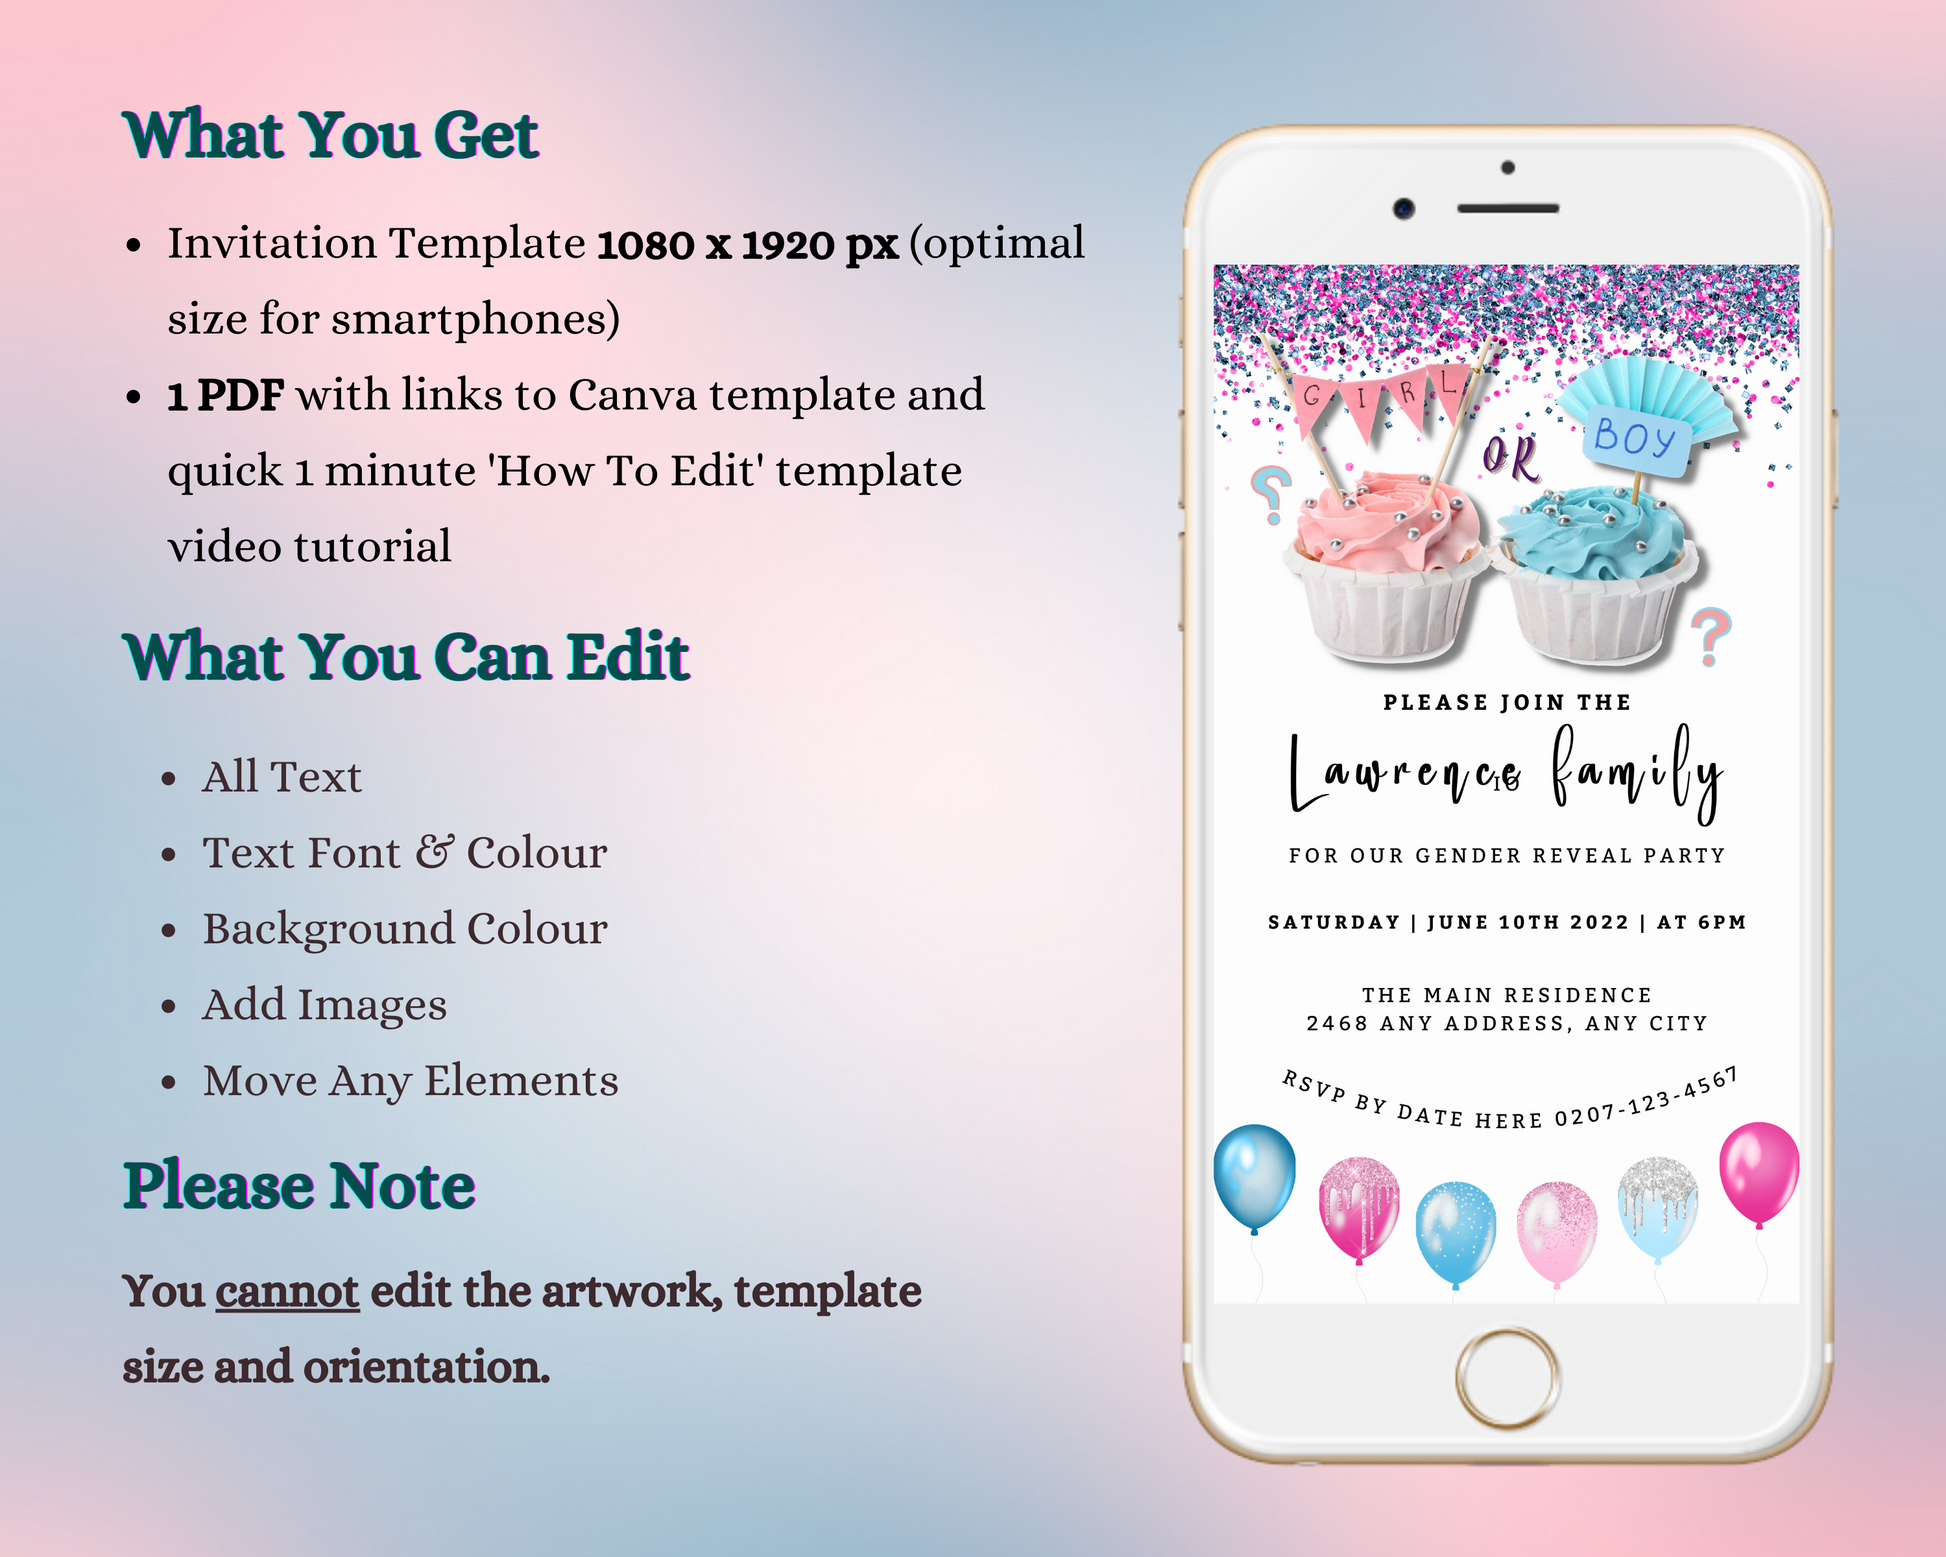 Customisable Gender Reveal Evite on smartphone screen displaying cupcakes and balloons, editable via Canva for digital sharing.